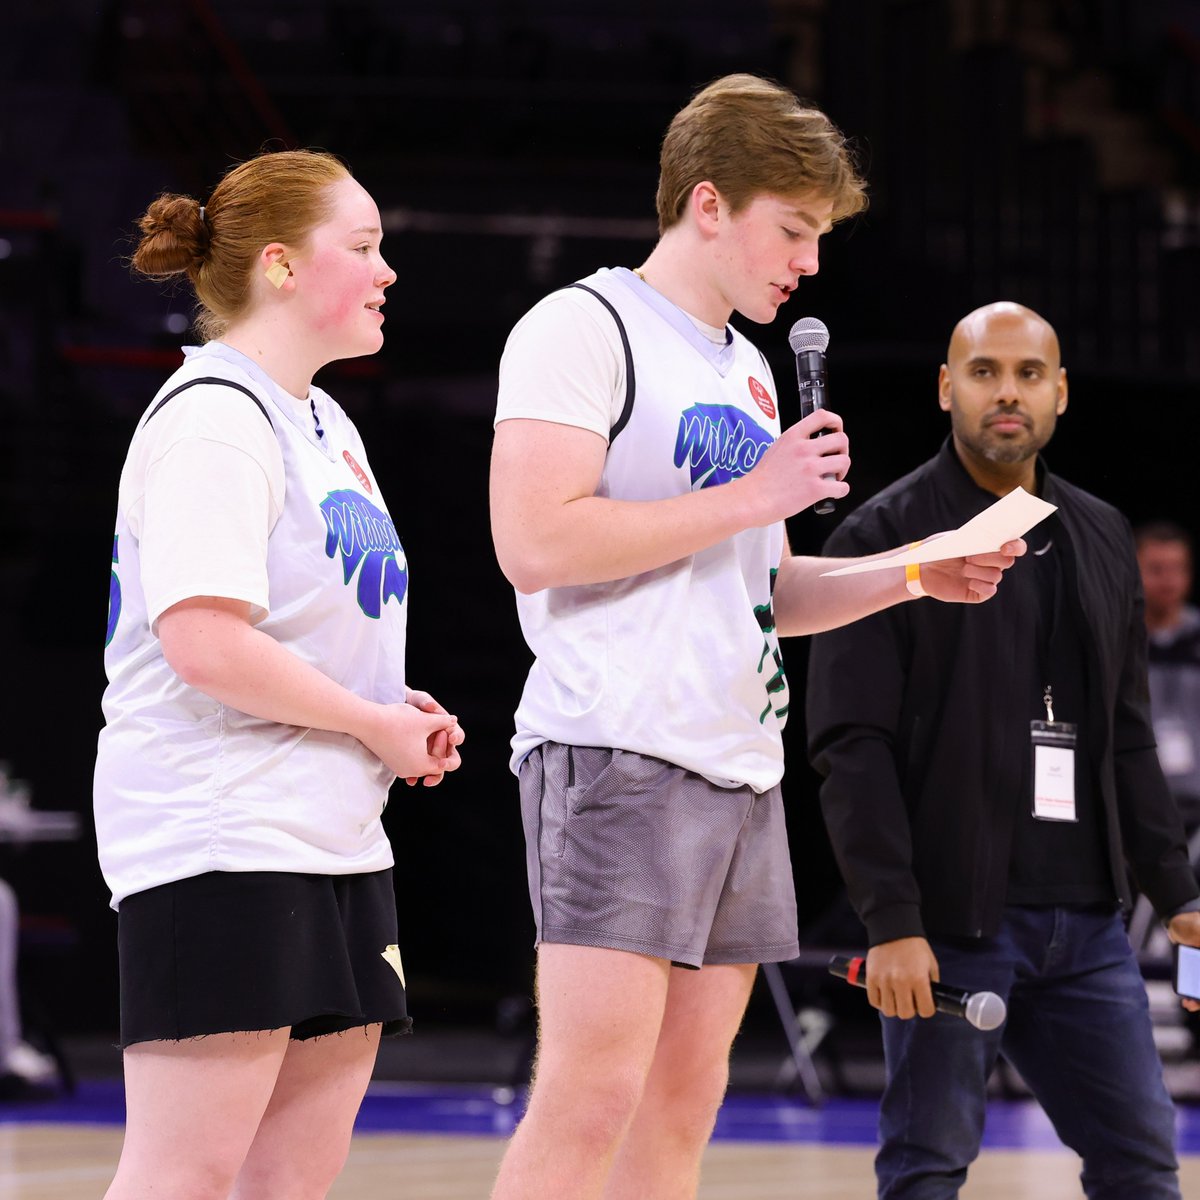 Bria and Connor King, twins from Eagan High School, have not only found a home in the Unified Champion Schools movement, but they have grown closer through their involvement in Unified programming. Read their story at specialolympicsminnesota.org/story/bria-con…